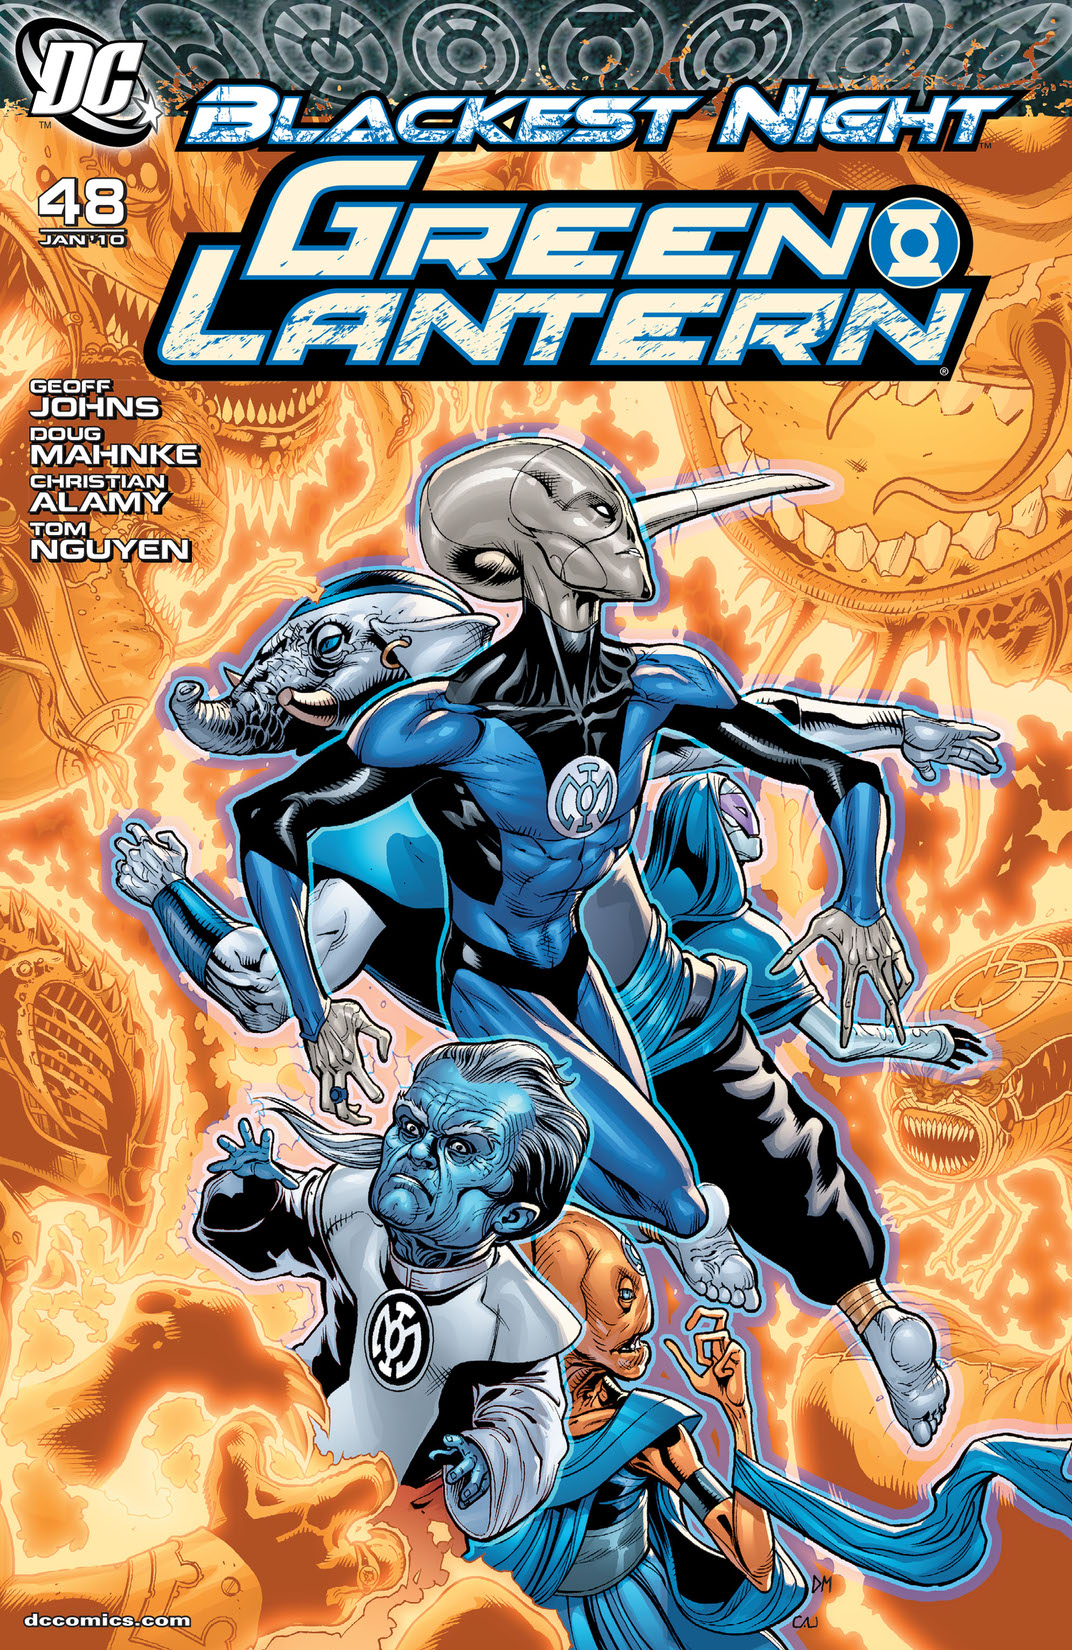 Green Lantern (2005-) #48 preview images